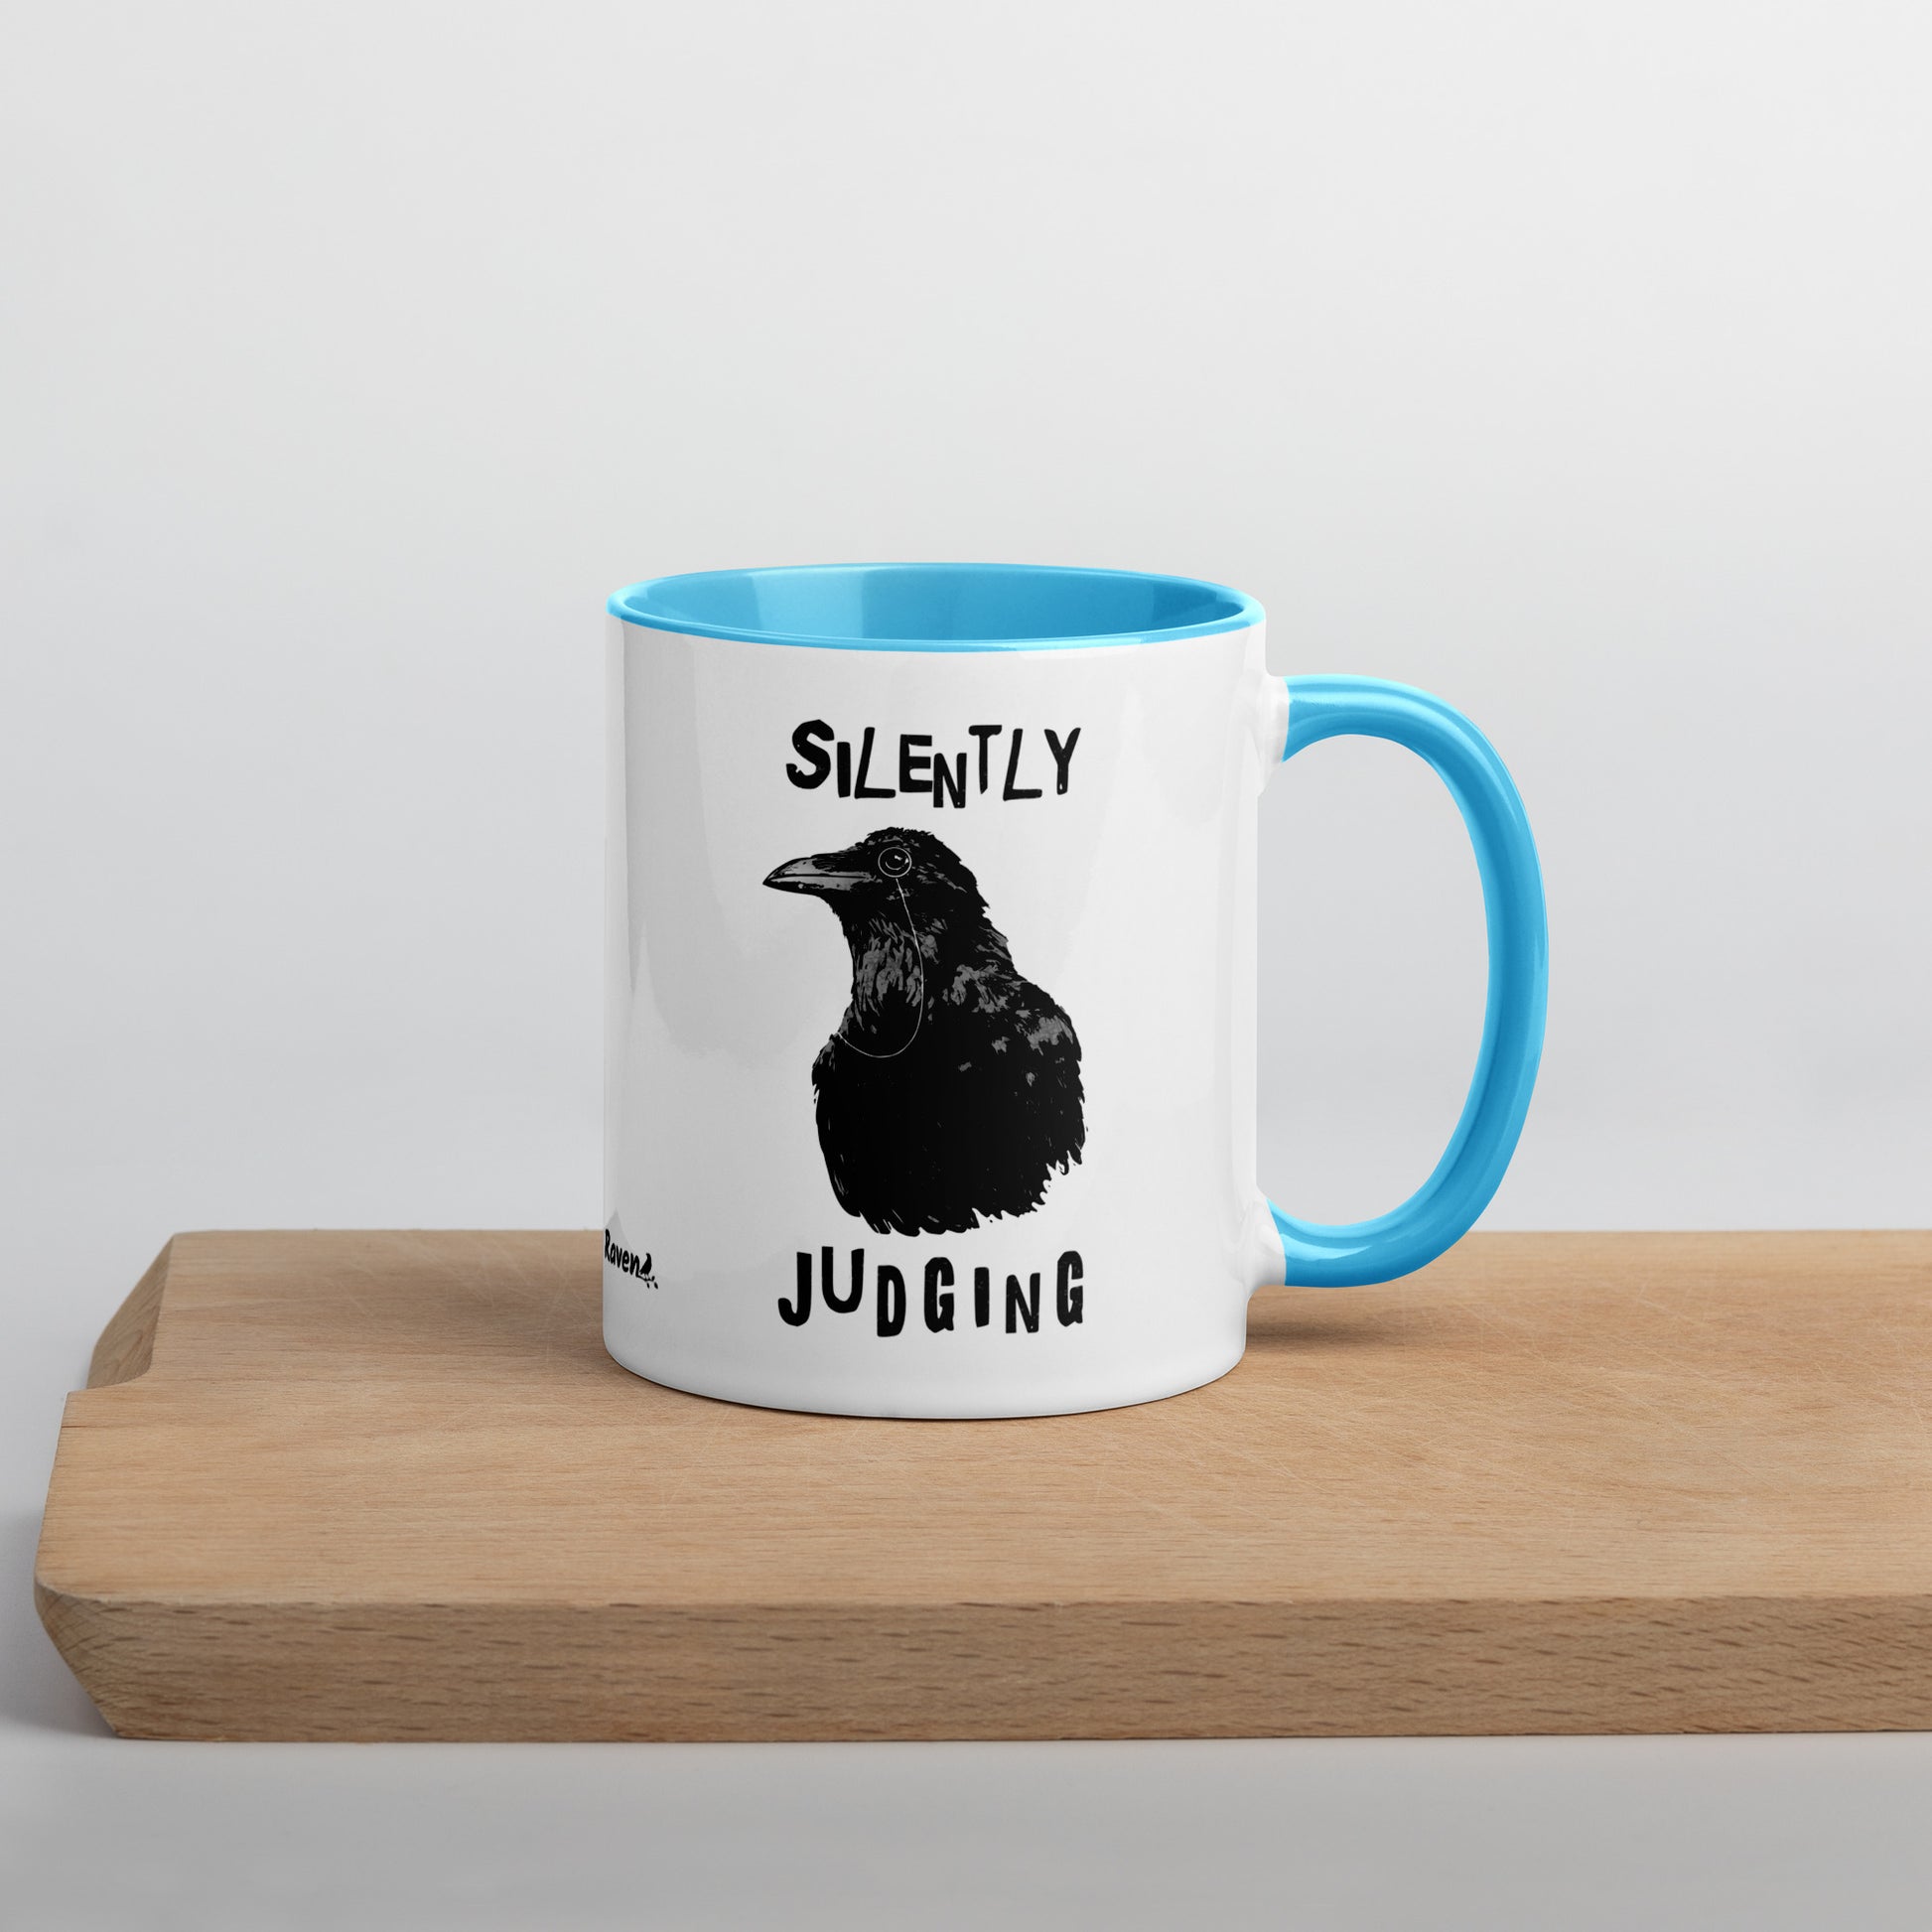 11 ounce ceramic mug with Silently Judging text surrounding a monacle-wearing crow. Double-sided design. Mug has blue rim, handle, and inside. Shown sitting on wooden cutting board with handle facing right.